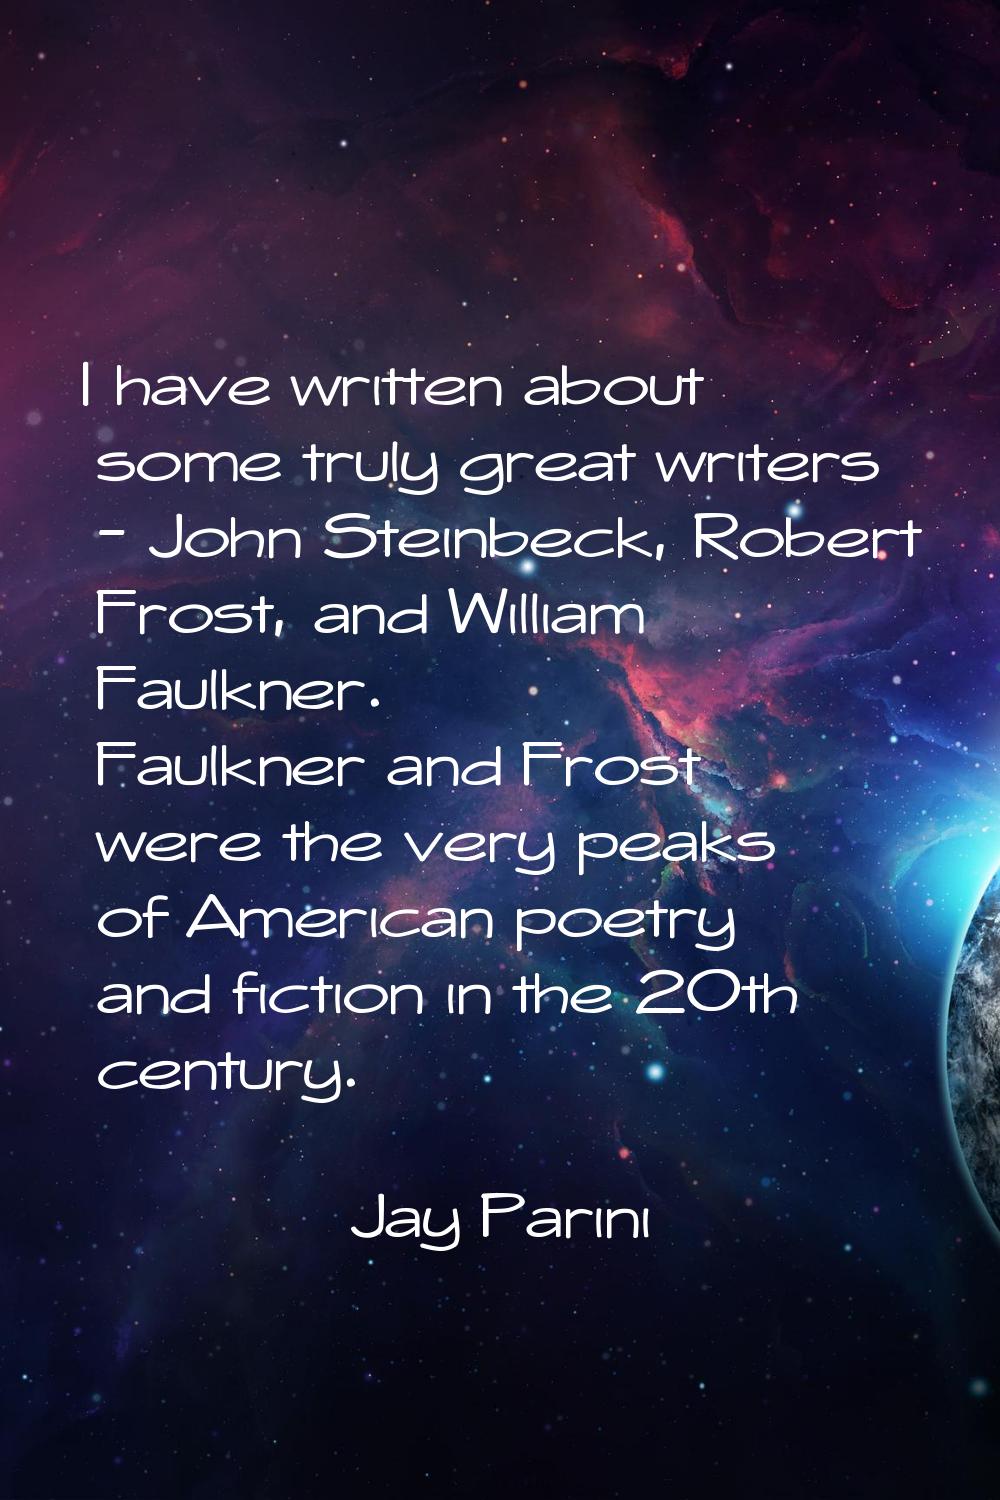 I have written about some truly great writers - John Steinbeck, Robert Frost, and William Faulkner.